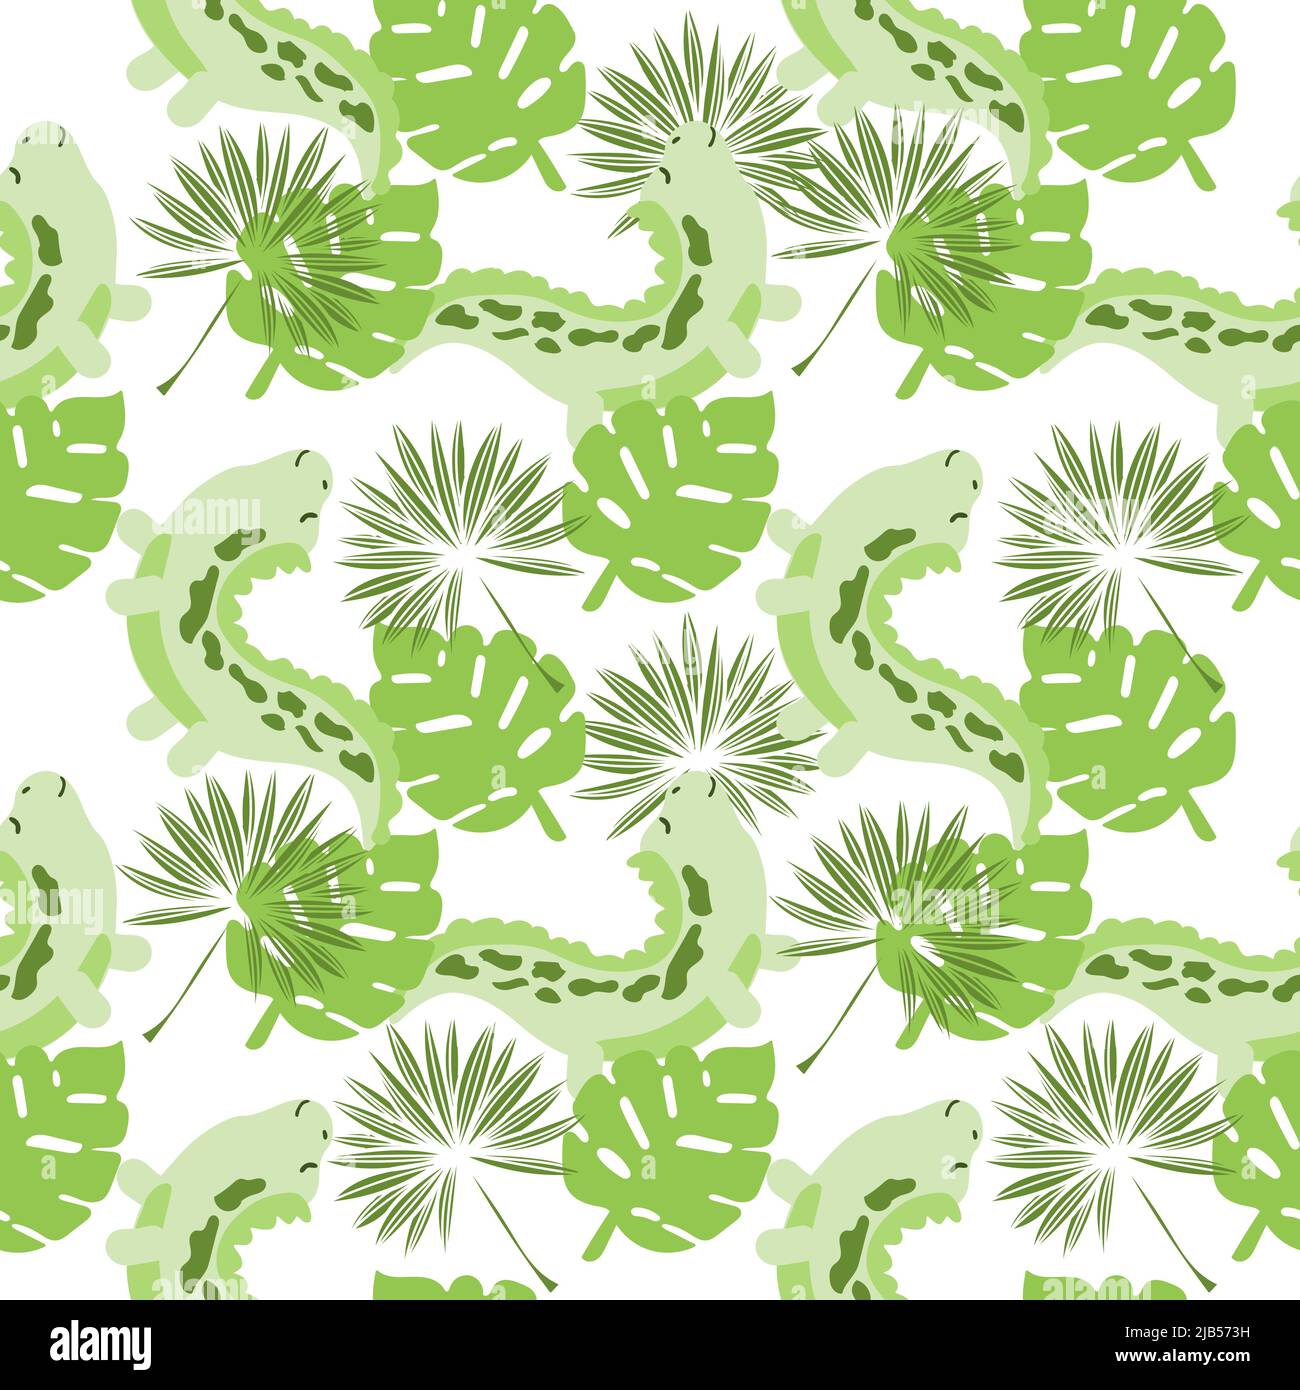 Dino plant Stock Vector Images - Page 3 - Alamy